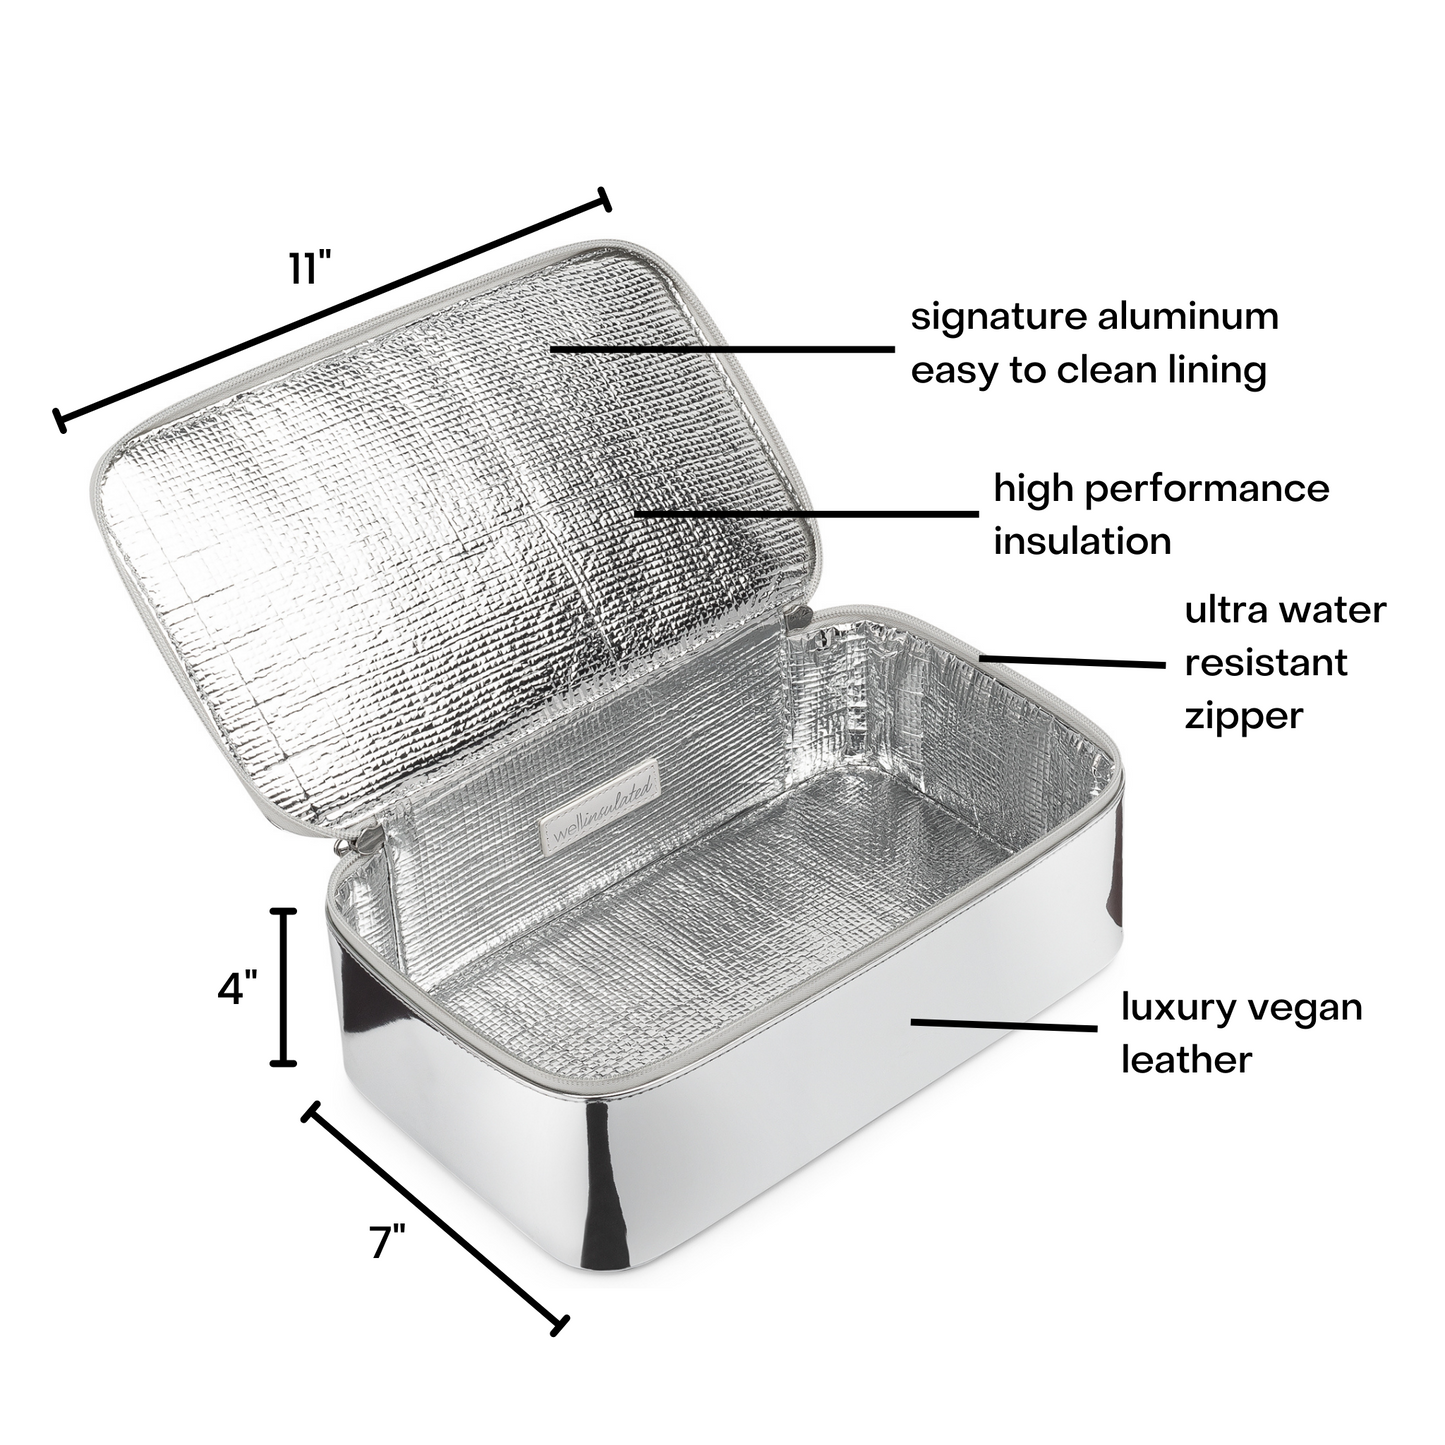 The Well Insulated Performance Travel Case is open showing the silver lining of the bag. There is text pointing out various features of the bag as well as the dimensions.